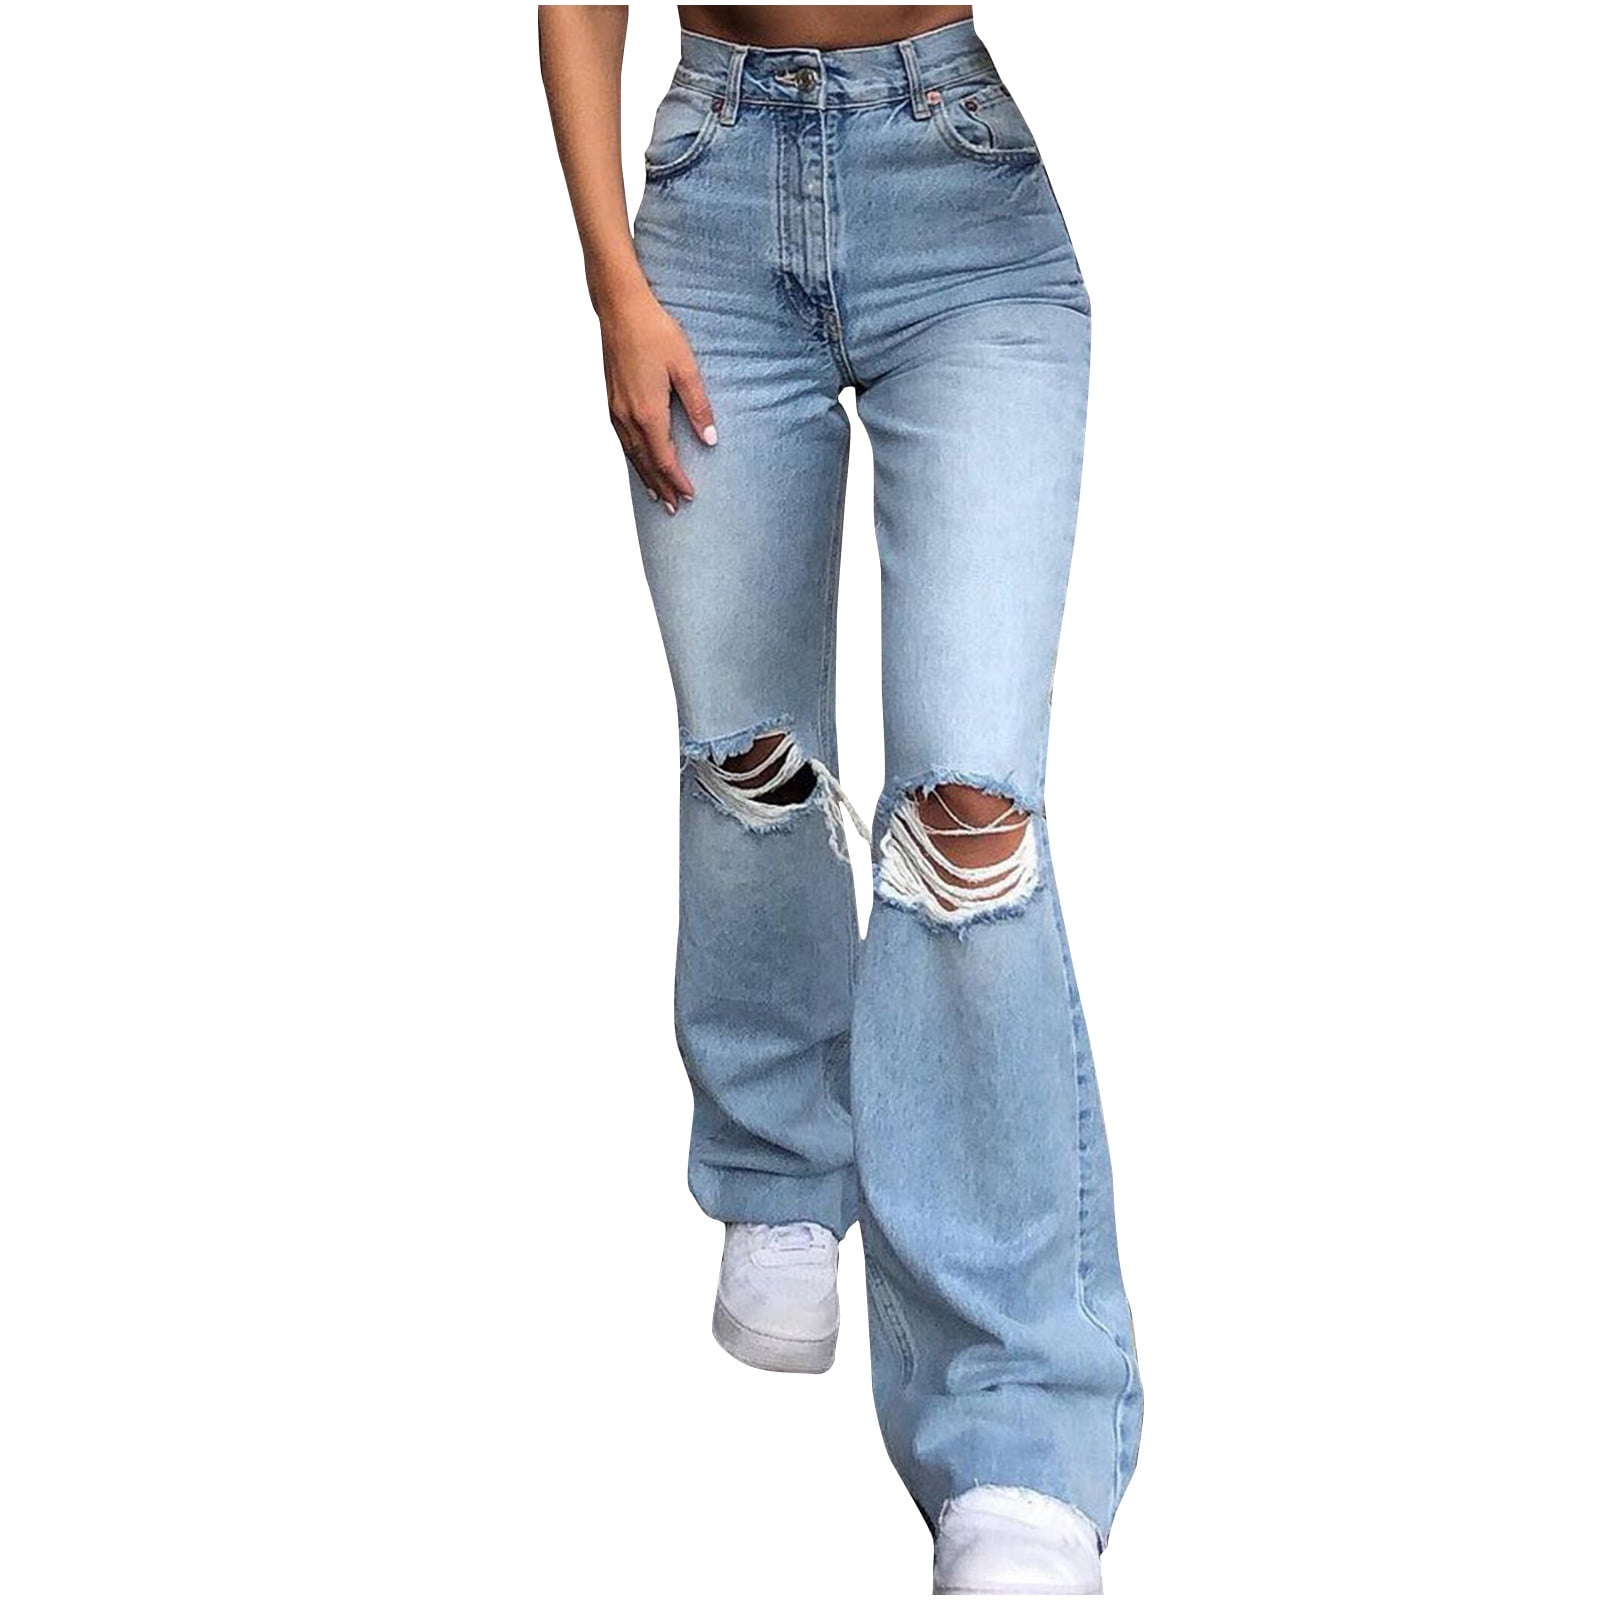 Hfyihgf Women's Ripped Flare Jeans Distressed Bootcut Jeans Stretch Bell  Bottom Denim Pants with Pockets(Light Blue,M)